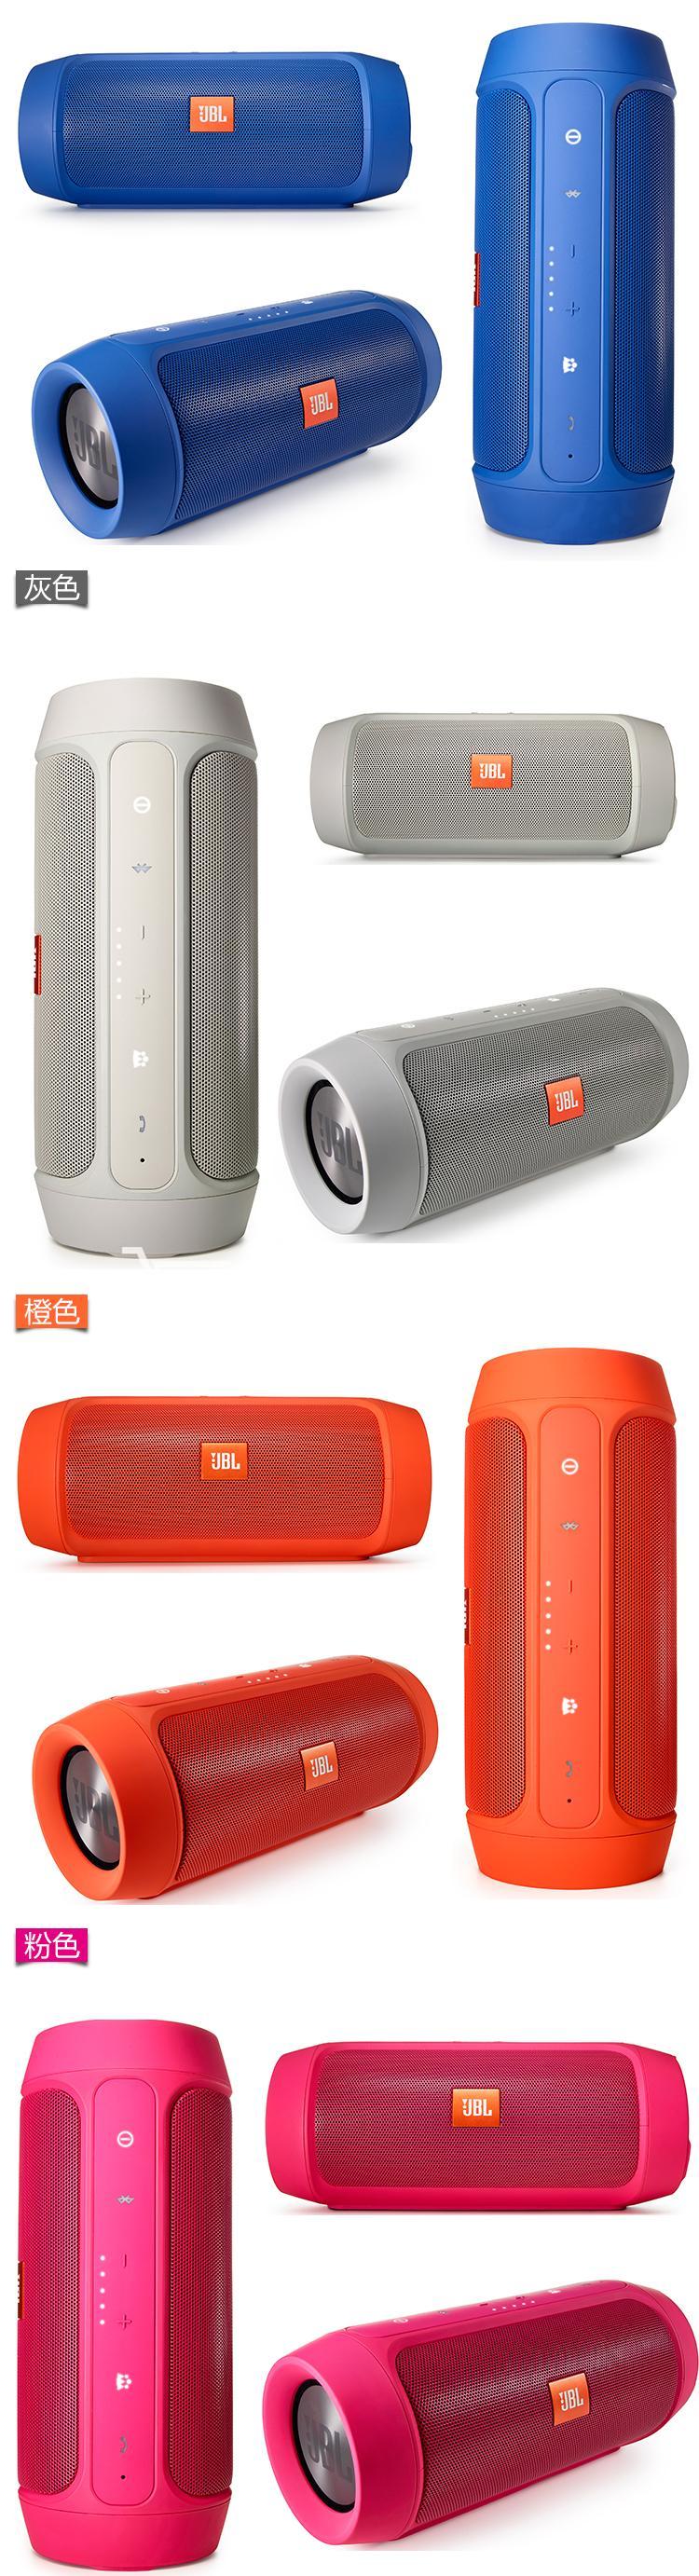 jbl charge 2 portable bluetooth speaker with usb charger power bank mobile phone accessories special best offer buy one lk sri lanka 08946 - JBL Charge 2 Portable Bluetooth Speaker with USB Charger Power Bank